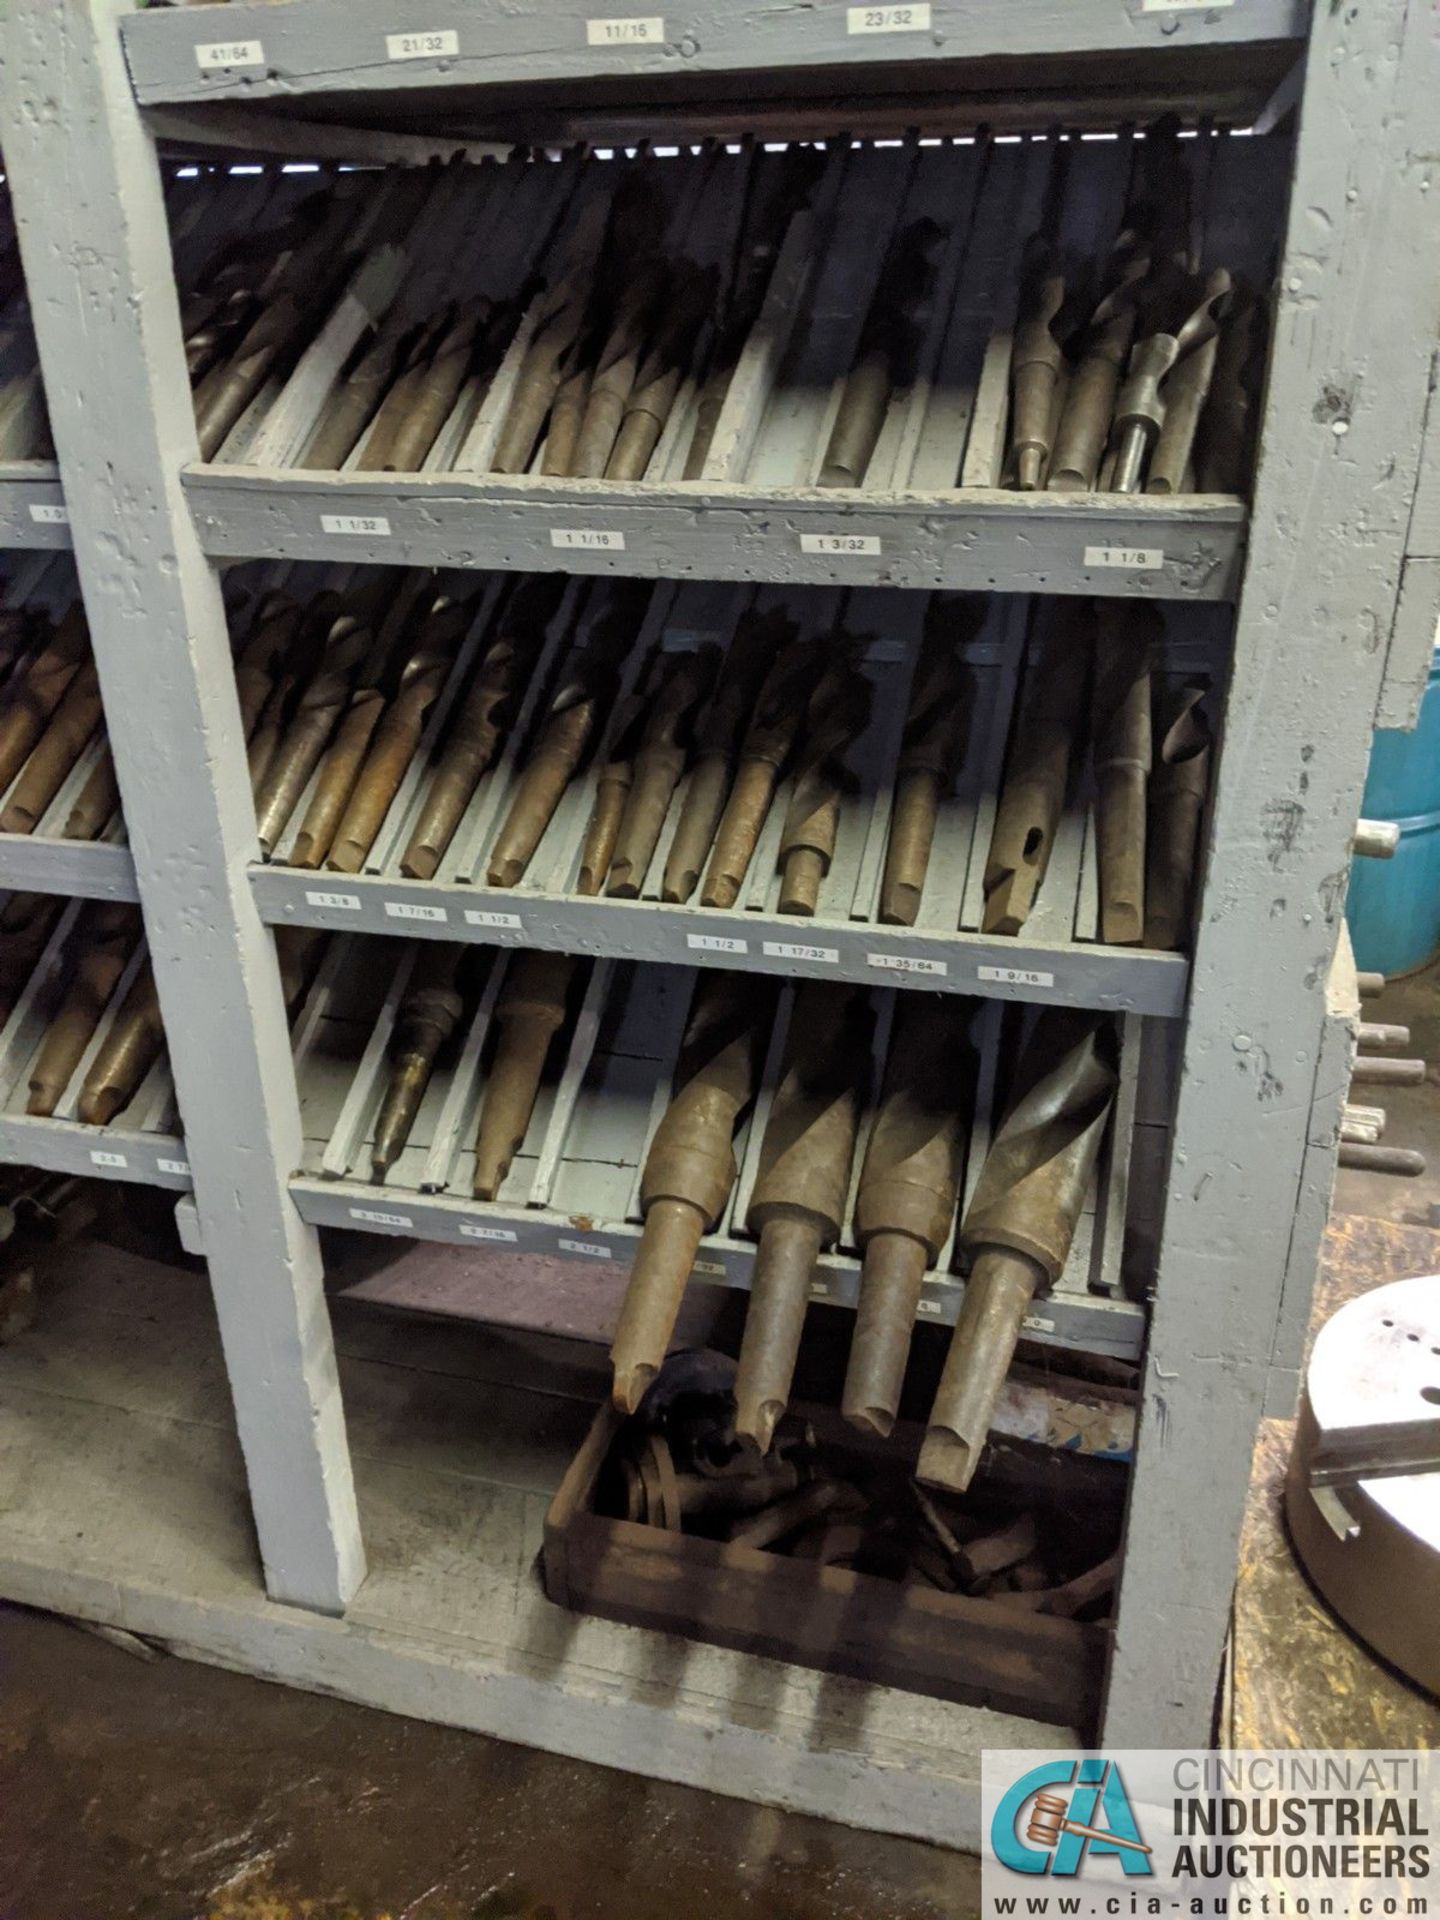 (LOT) LARGE QUANTITY OF HS DRILLS AND REAMERS IN WOOD RACK, MOSTLY MORSE TAPER - Image 2 of 8